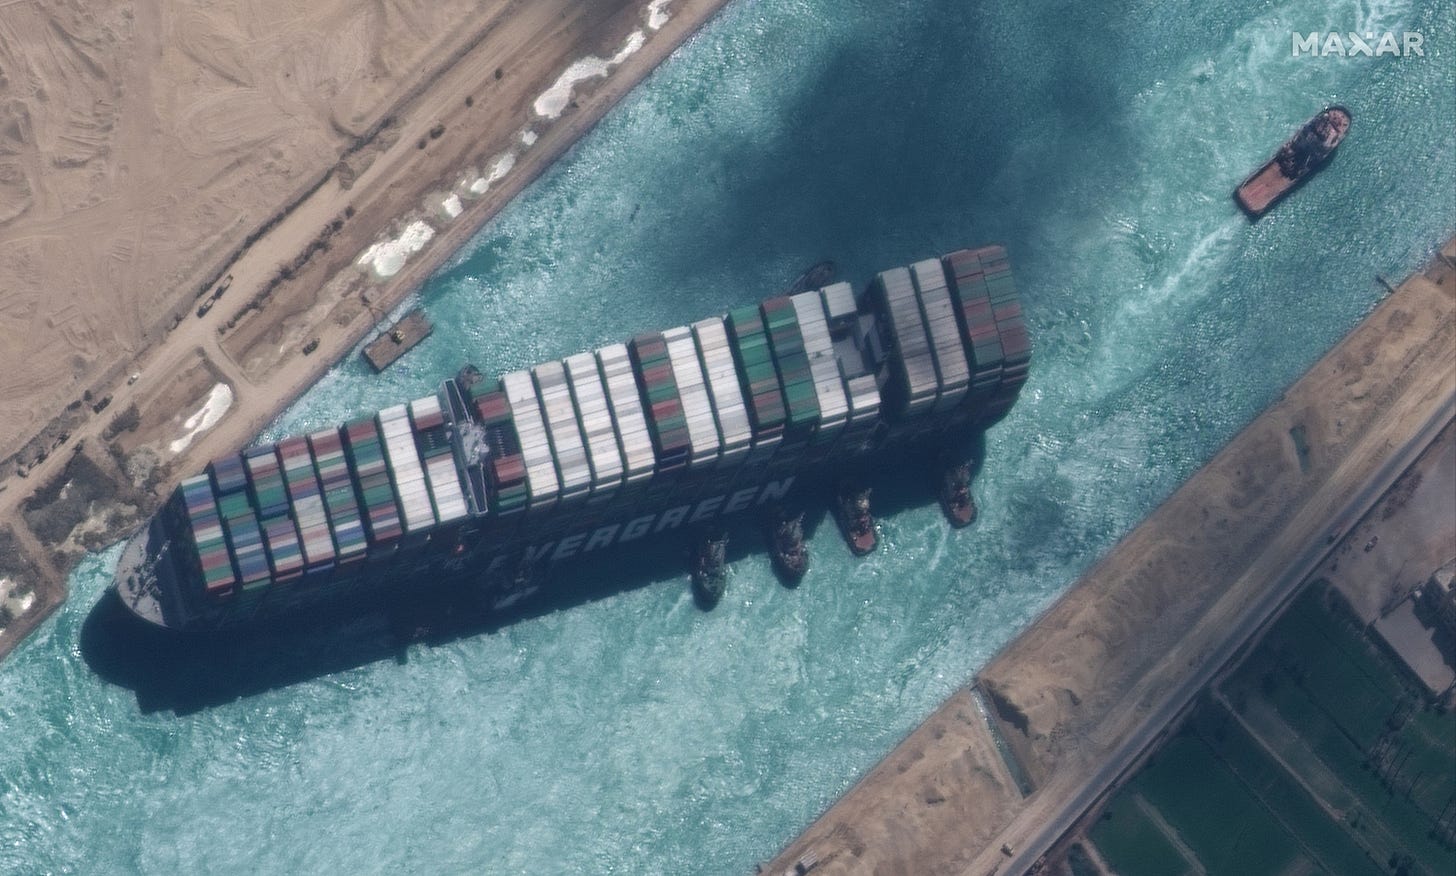 How did Ever Given ship get stuck in the Suez Canal and how was it freed?